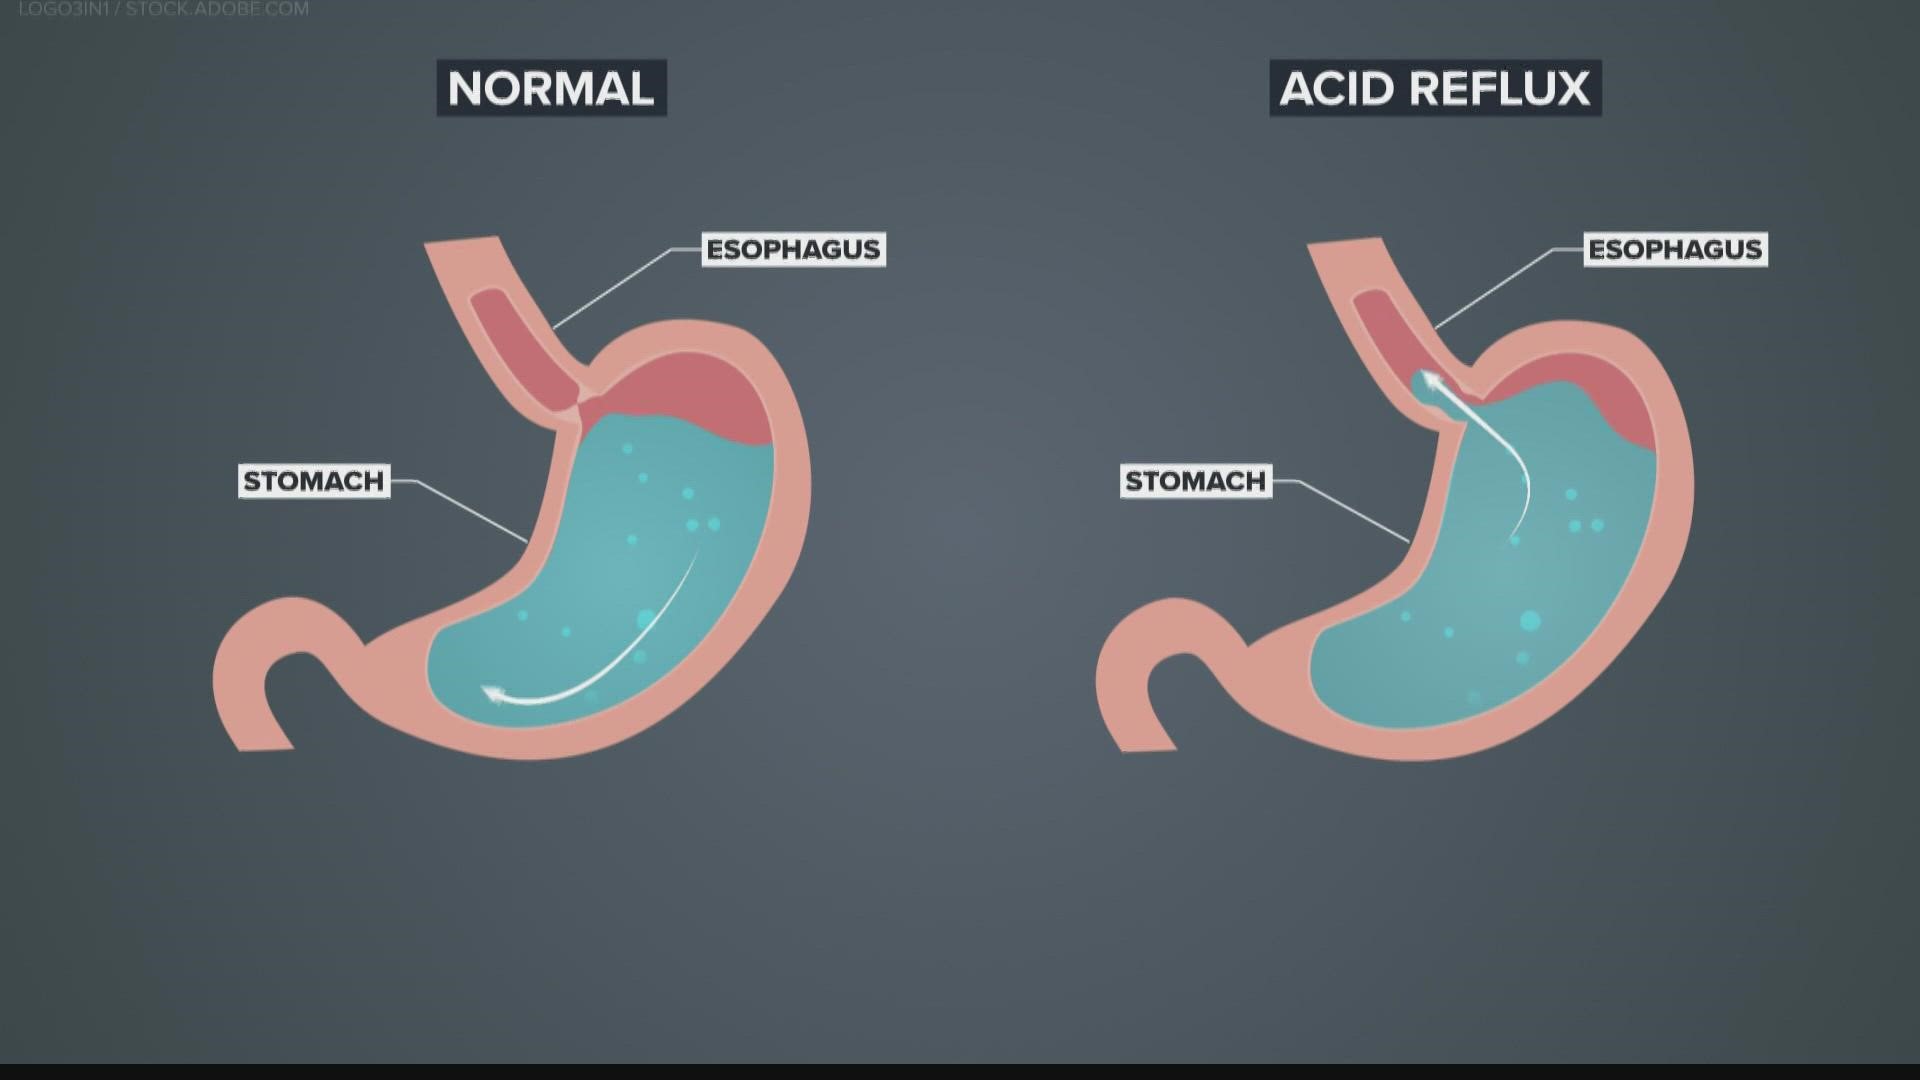 While your stomach has a protective lining, the esophagus does not. This can become painful, and over time, dangerous.